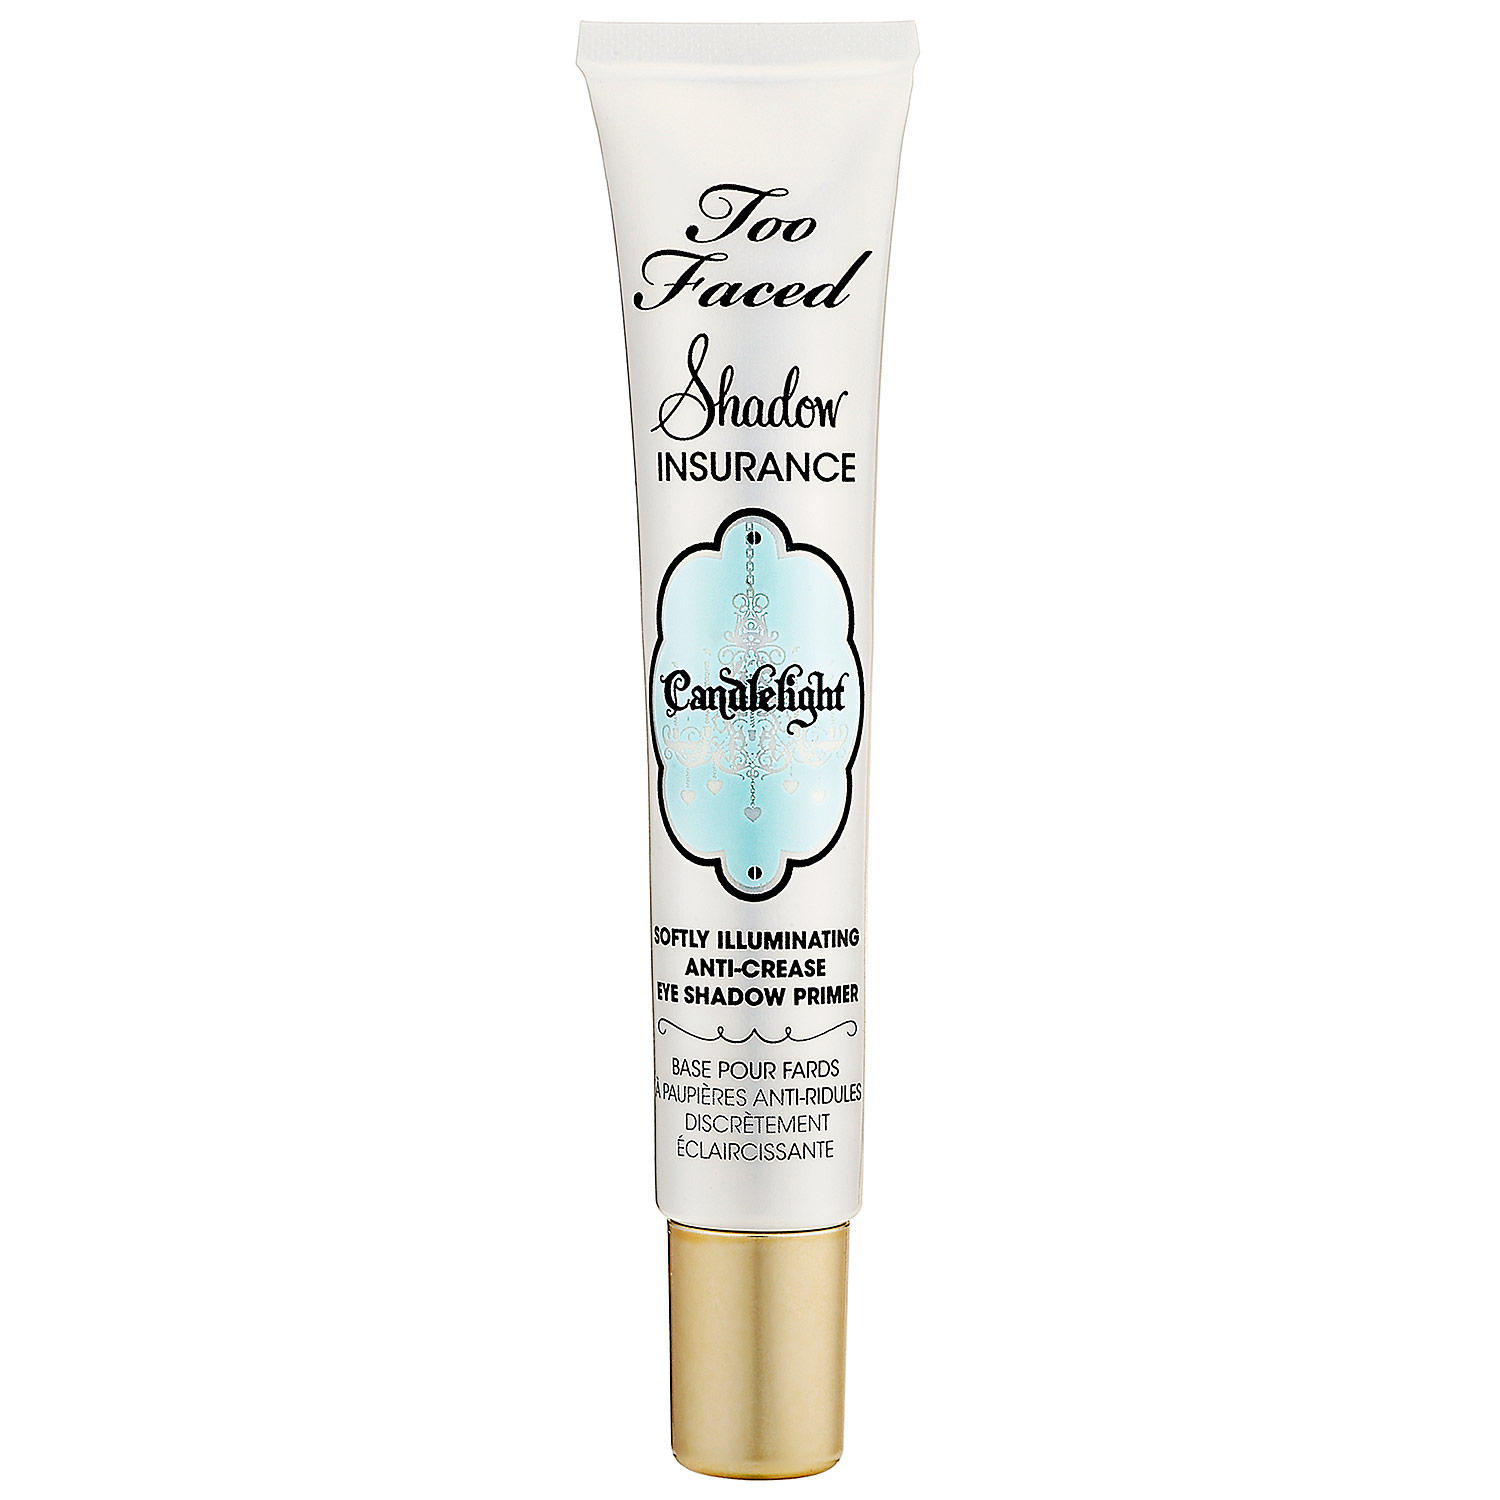 Too Faced Shadow Insurance Anti-Crease Eyeshadow Primer Candlelight 